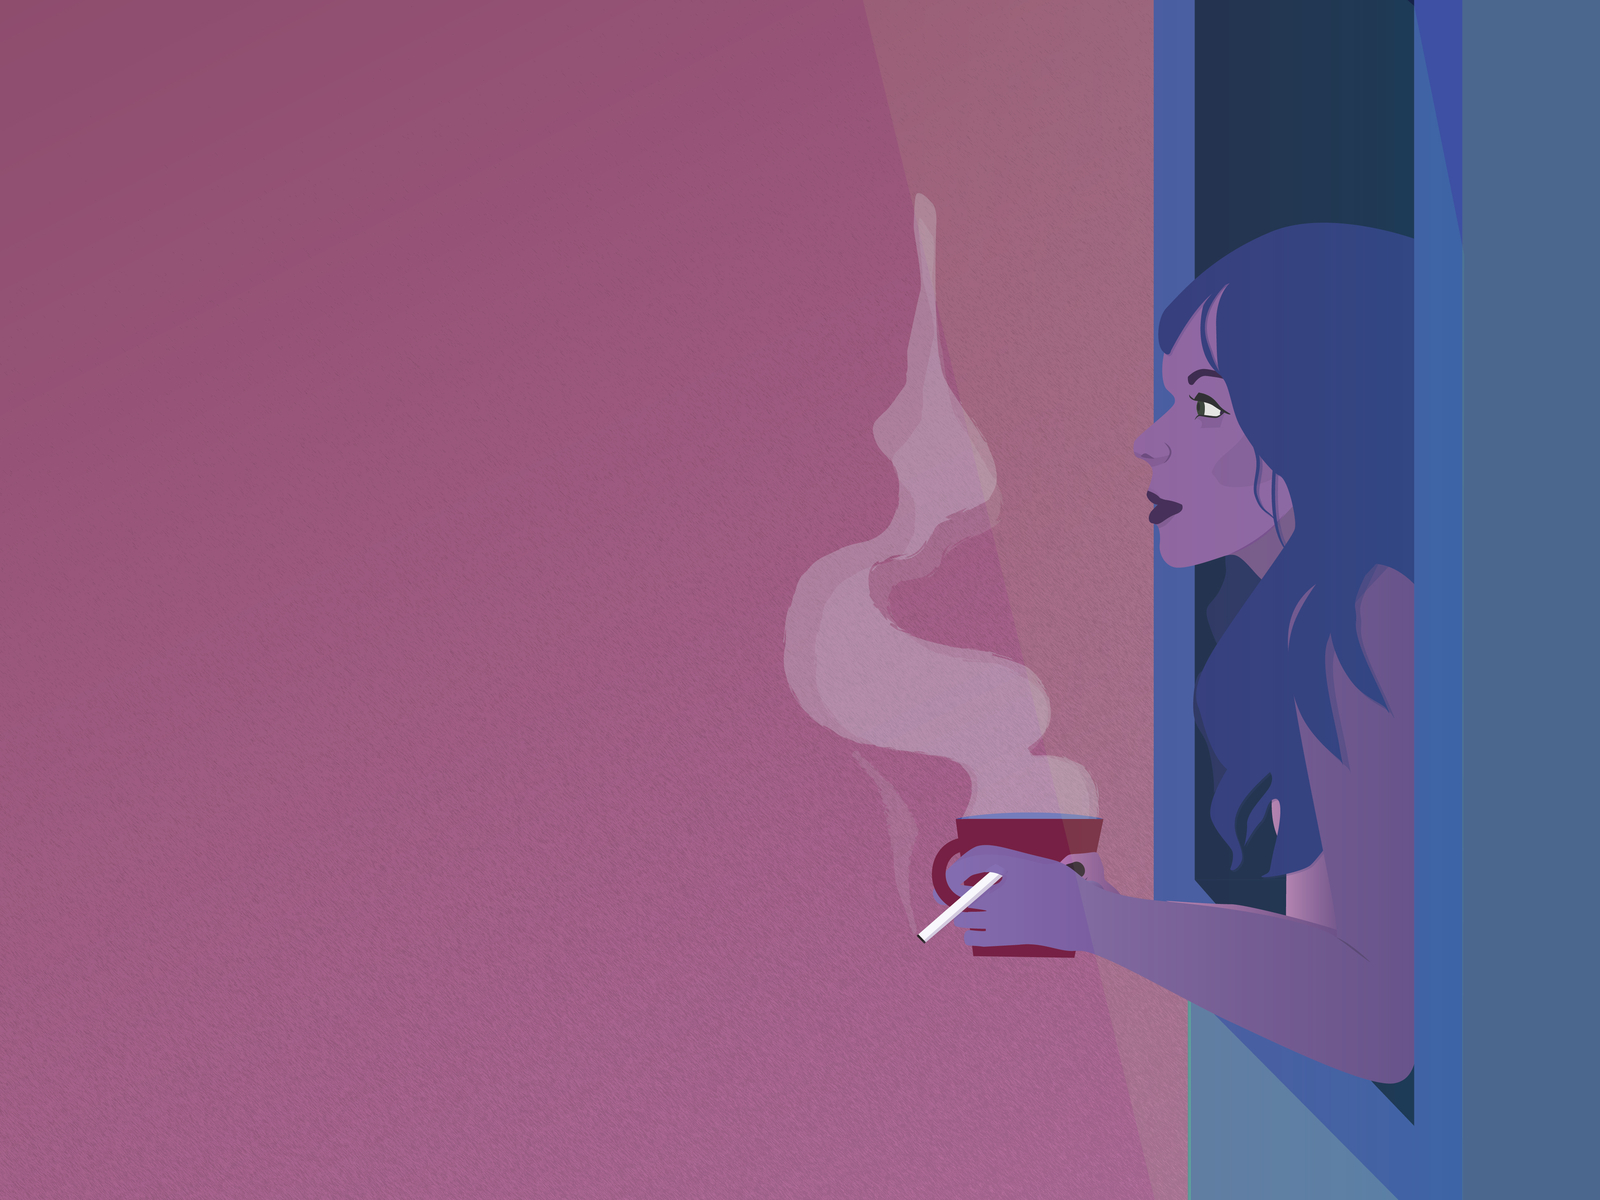 widnow and cigarette by Joana on Dribbble